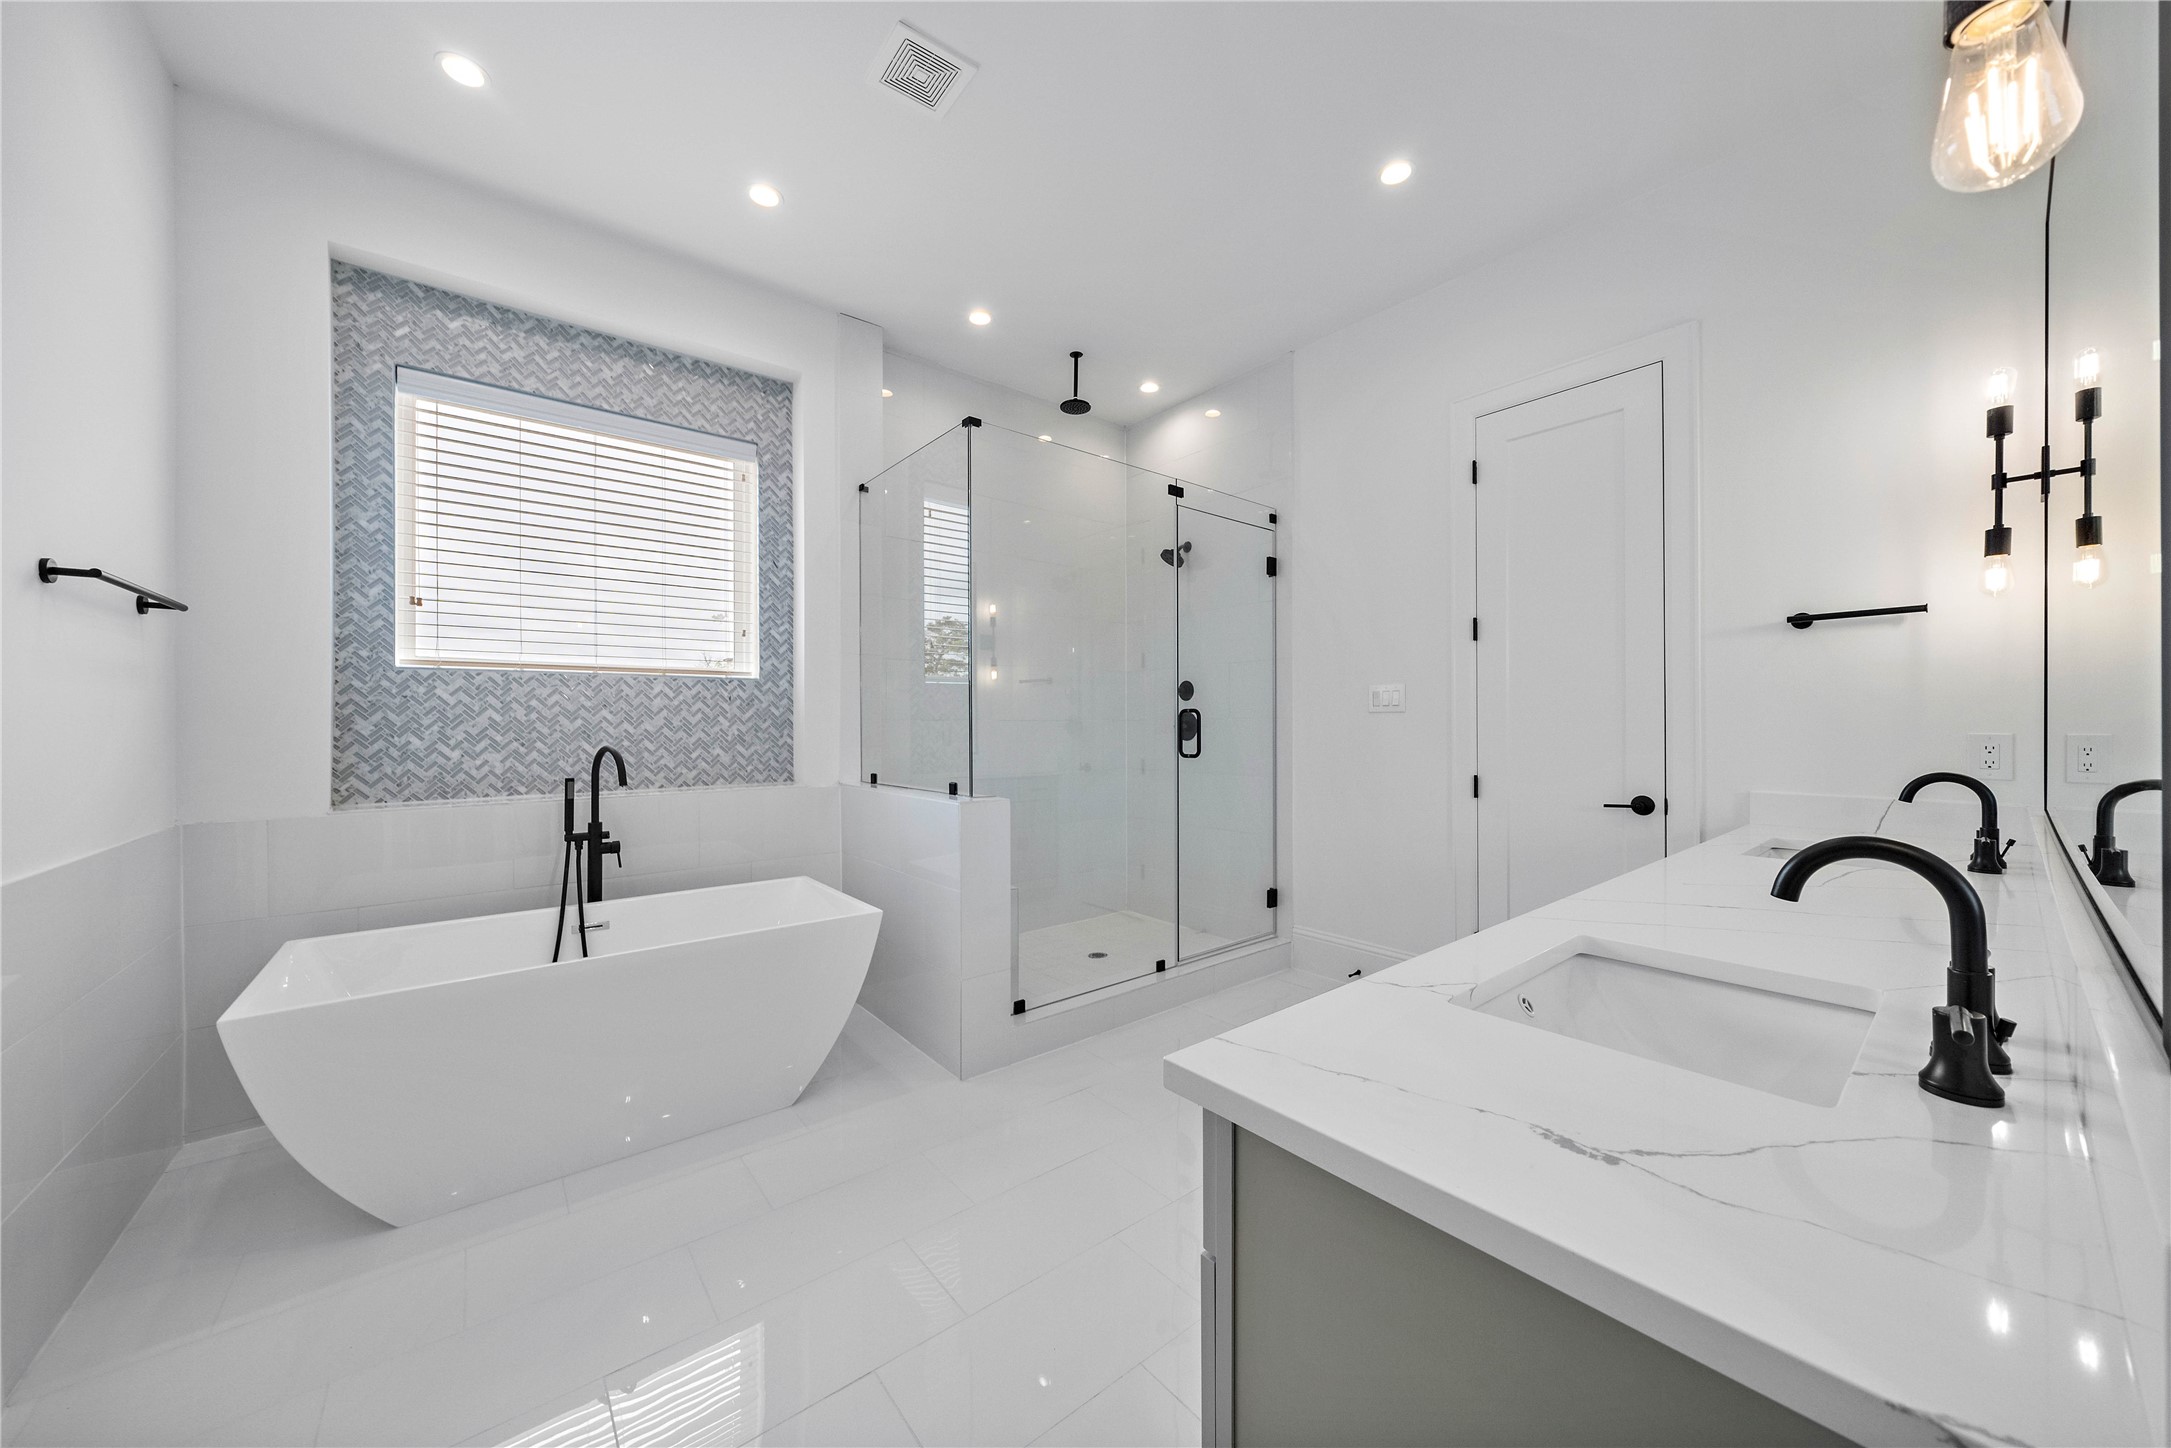 Spa-like master bath features frameless glass shower enclosure with dual shower heads and decorative tile with Herringbone inset design. Freestanding soaking tub for those relaxing evenings. (Photo is of a completed home, finishes are subject to change.)